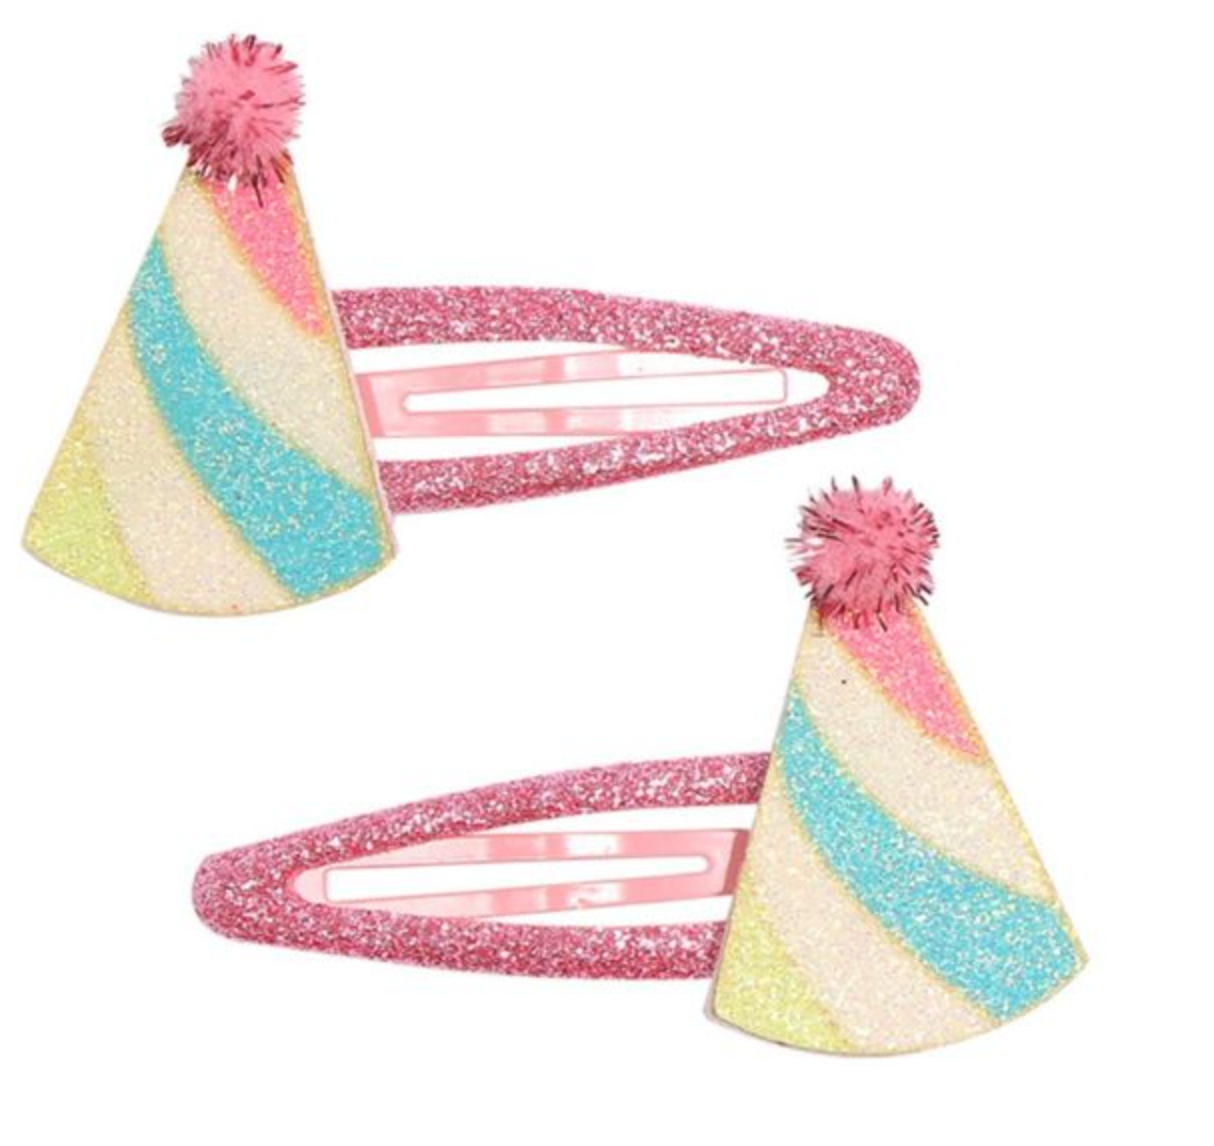 2-pack of Hair clips